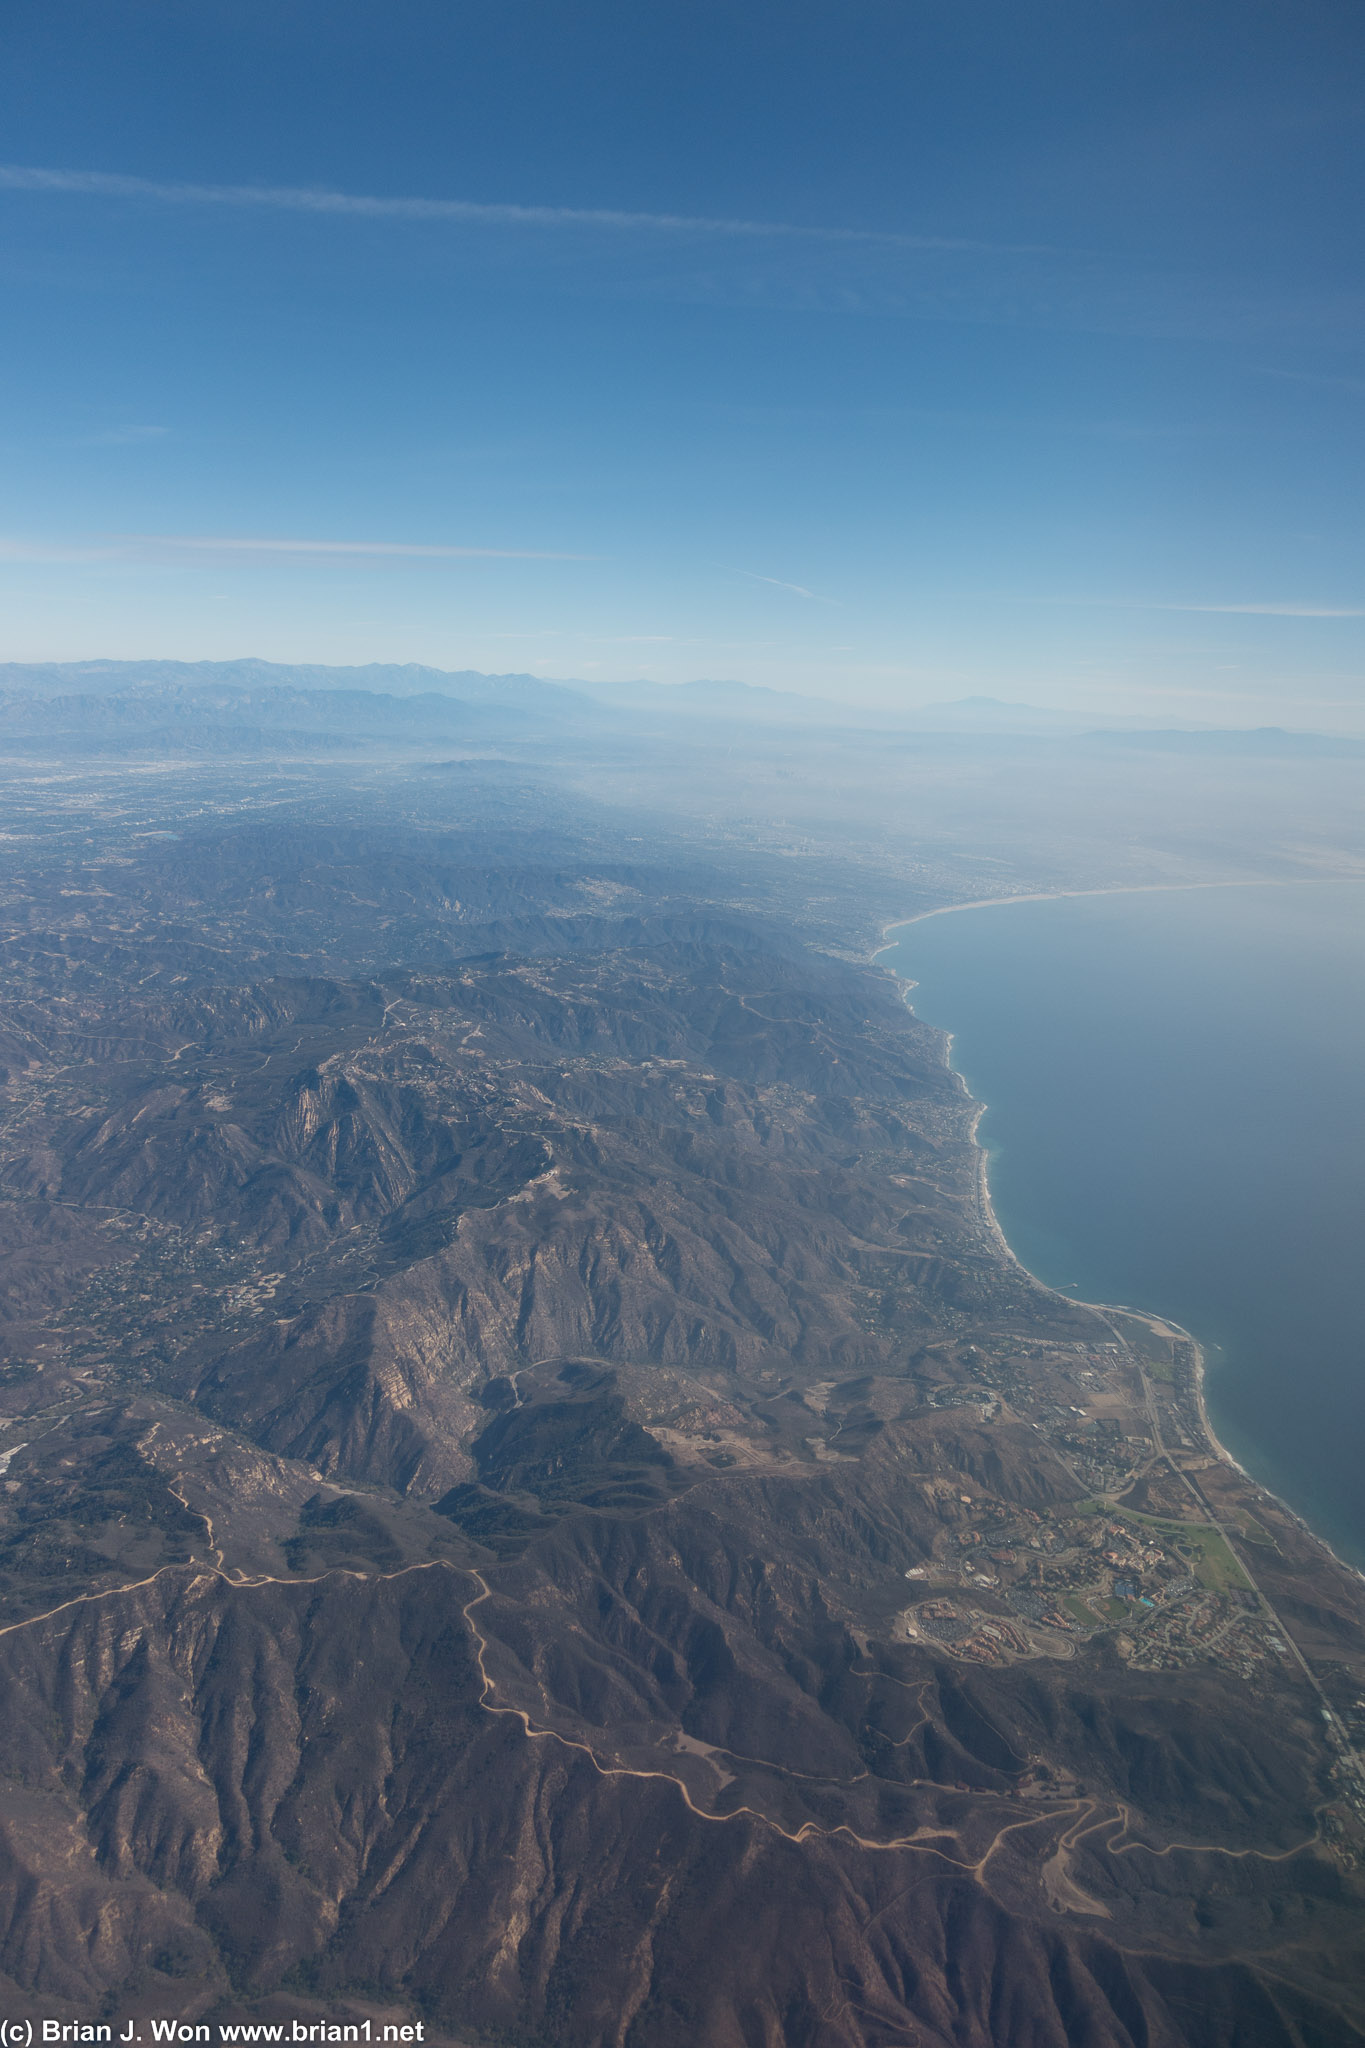 Setting up for landing over Los Angeles.